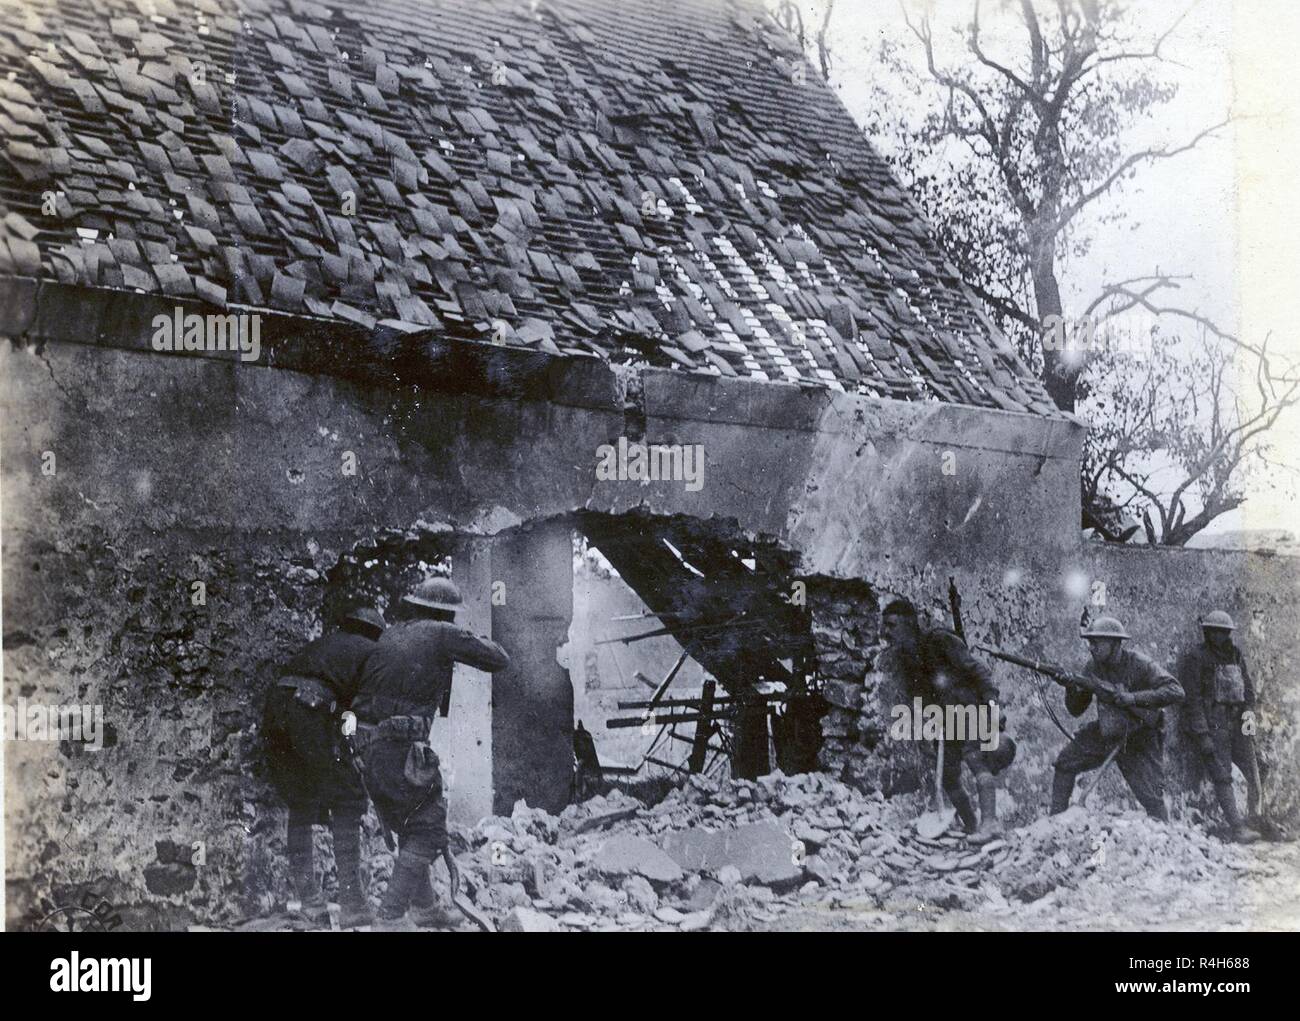 National Guard Soldiers of the 166th Infantry (formerly the 4th Regiment, Ohio National Guard) move forward with weapons at the ready during an attack in the autumn of 1918. The 166th Infantry fought as part of the 42nd “Rainbow” Division during St. Mihiel in September and Meuse-Argonne in October, part of the American Expeditionary Force 100 days offensive that brought an end to World War I. Stock Photo